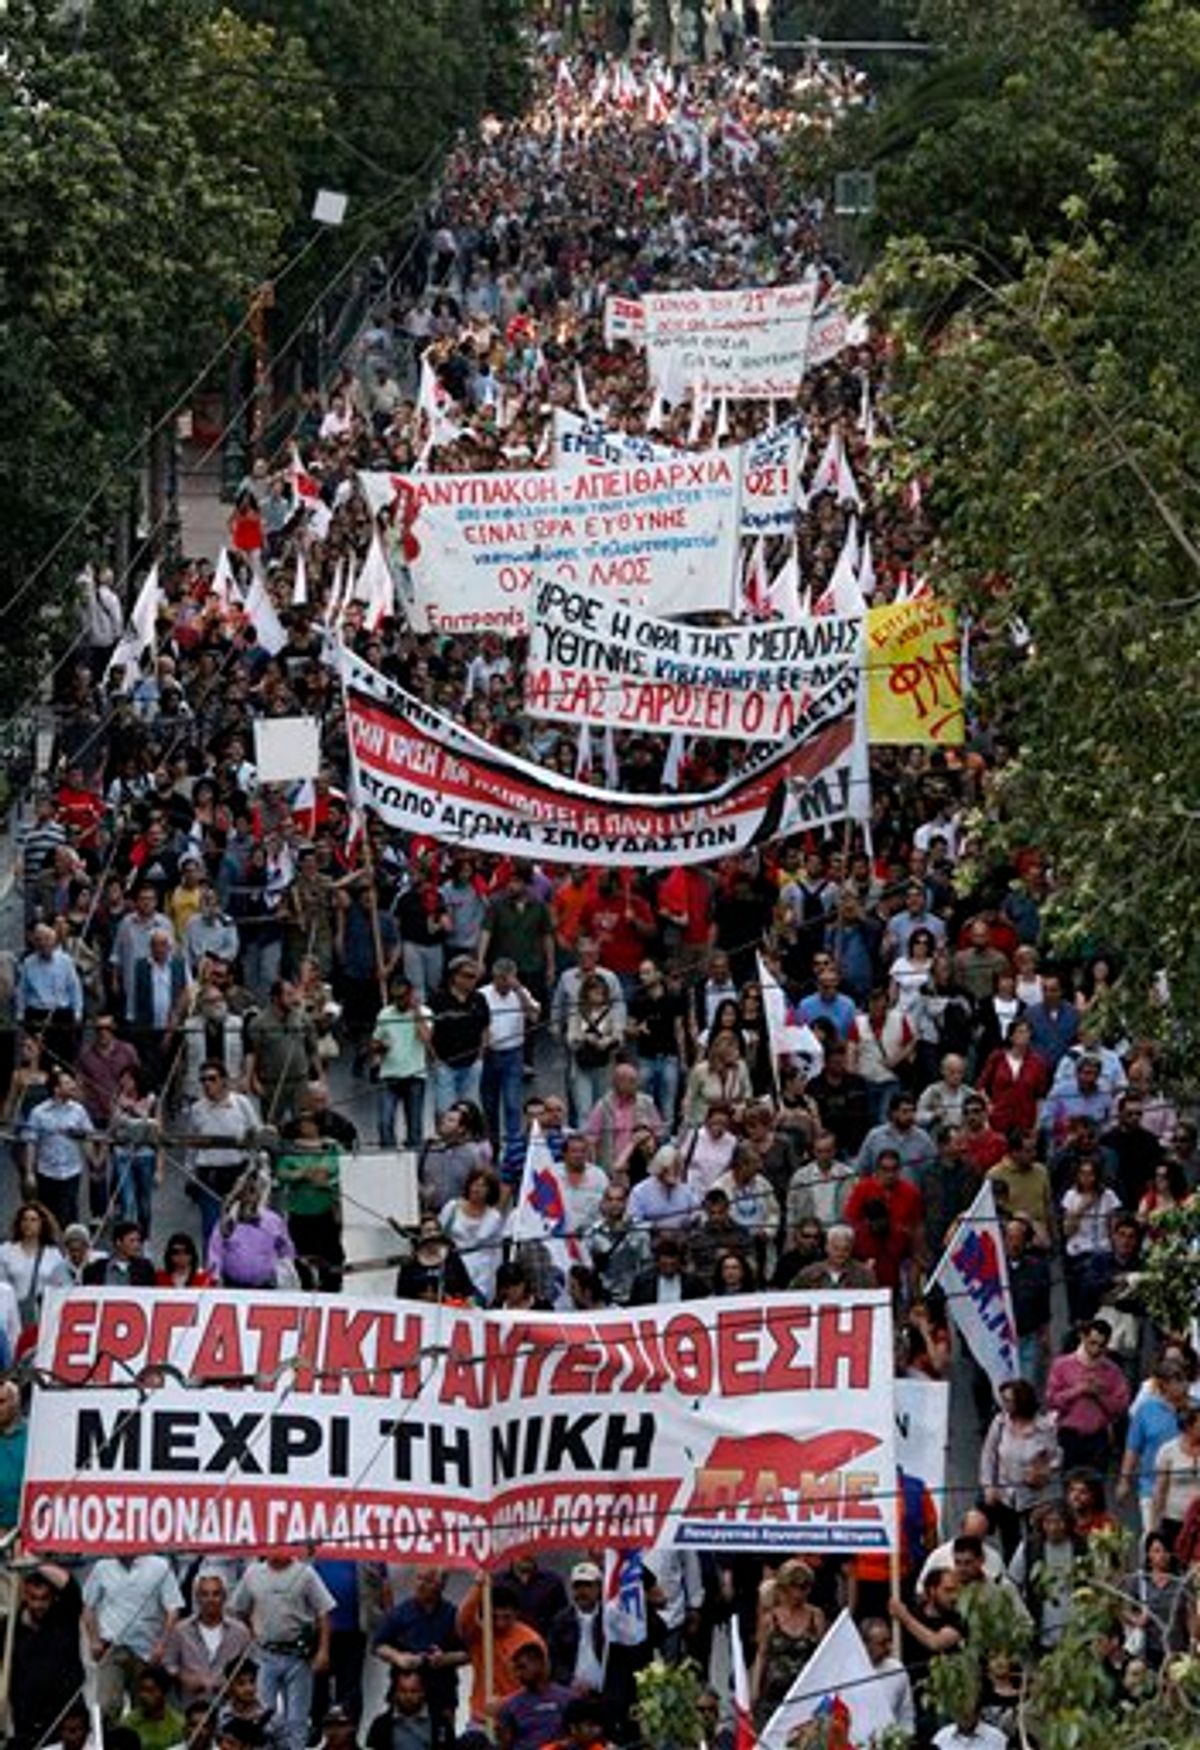 Pro communist protesters march during an anti government rally in Athens on Thursday, May 6, 2010. Greek lawmakers approved a crucial austerity bill Thursday needed to tap 110 billion ($140 billion) in bailout loans from other eurozone countries and the International Monetary Fund, as massive crowds gathered outside parliament to protest the measures. The bill passed with 172 votes in favor and 121 against. Greeks have been outraged by the government's proposed fiscal measures, and demonstrations turned violent on Wednesday during a nationwide general strike, leaving three people dead after becoming trapped in a burning bank torched by demonstrators. (AP Photo/Dimitri Messinis)  (AP)